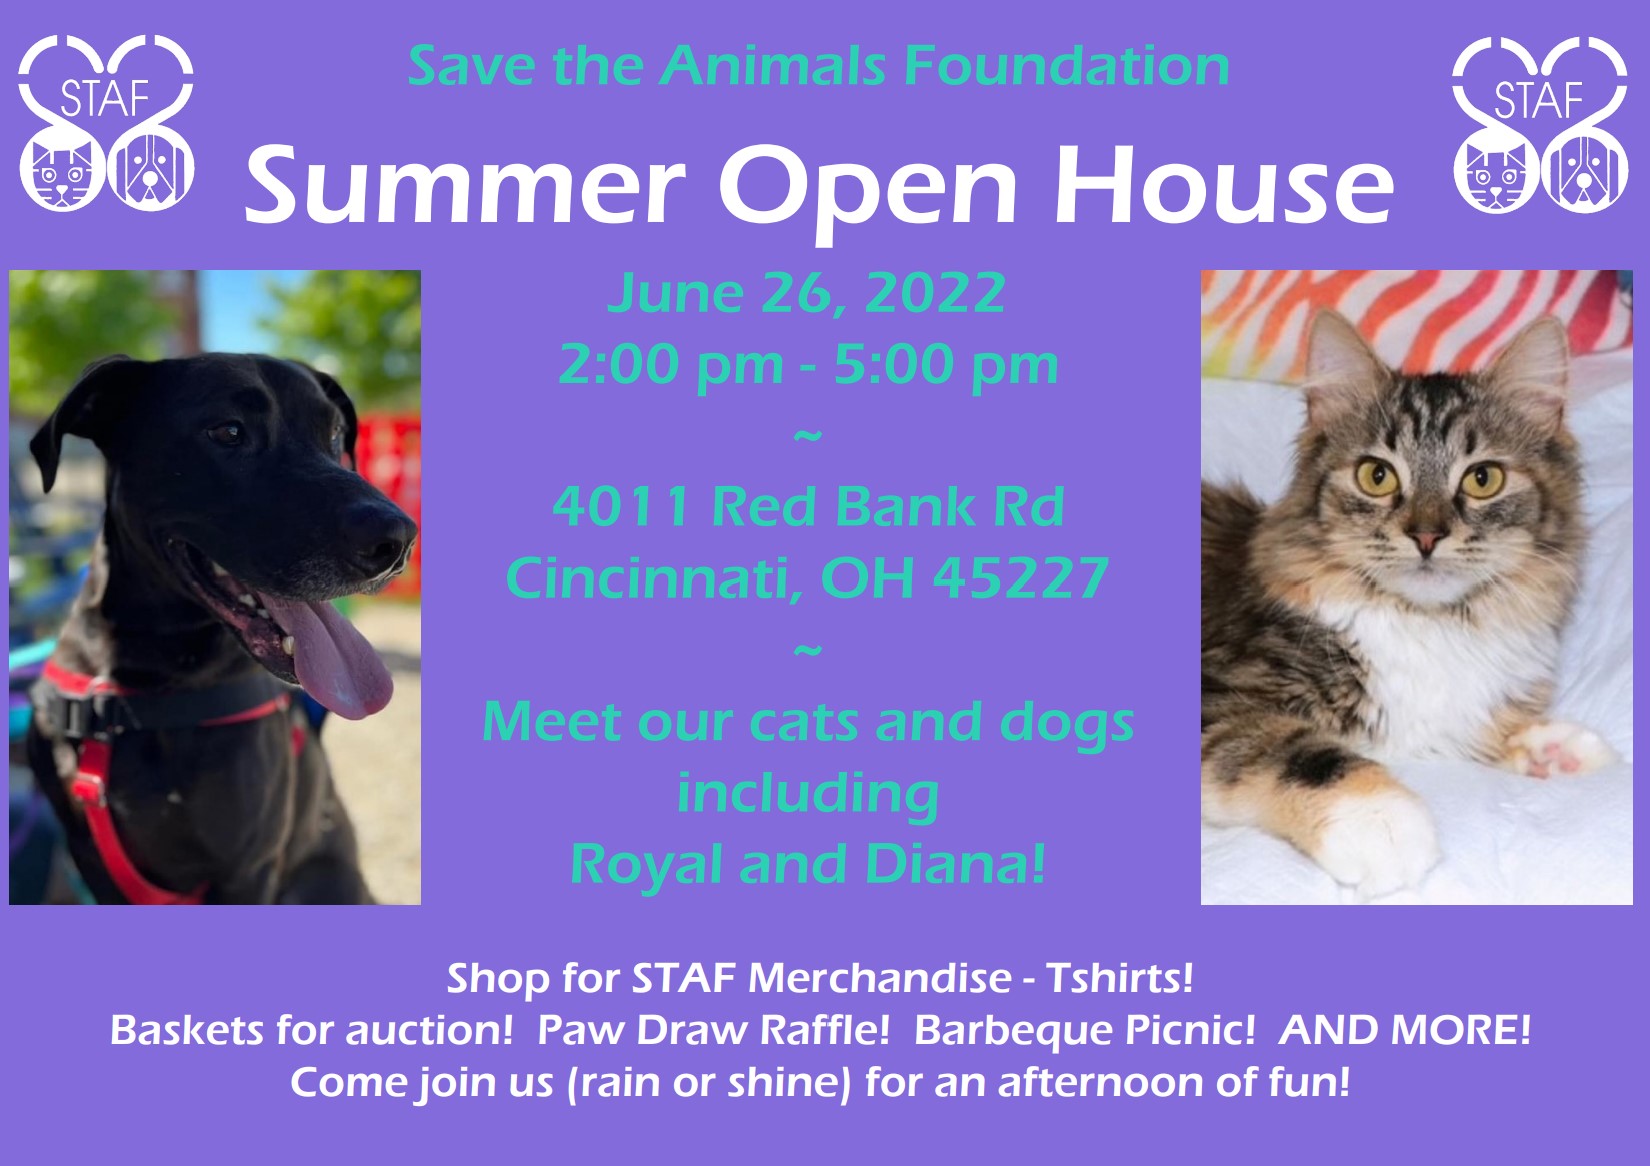 Summer Open House at Save the Animals Foundation